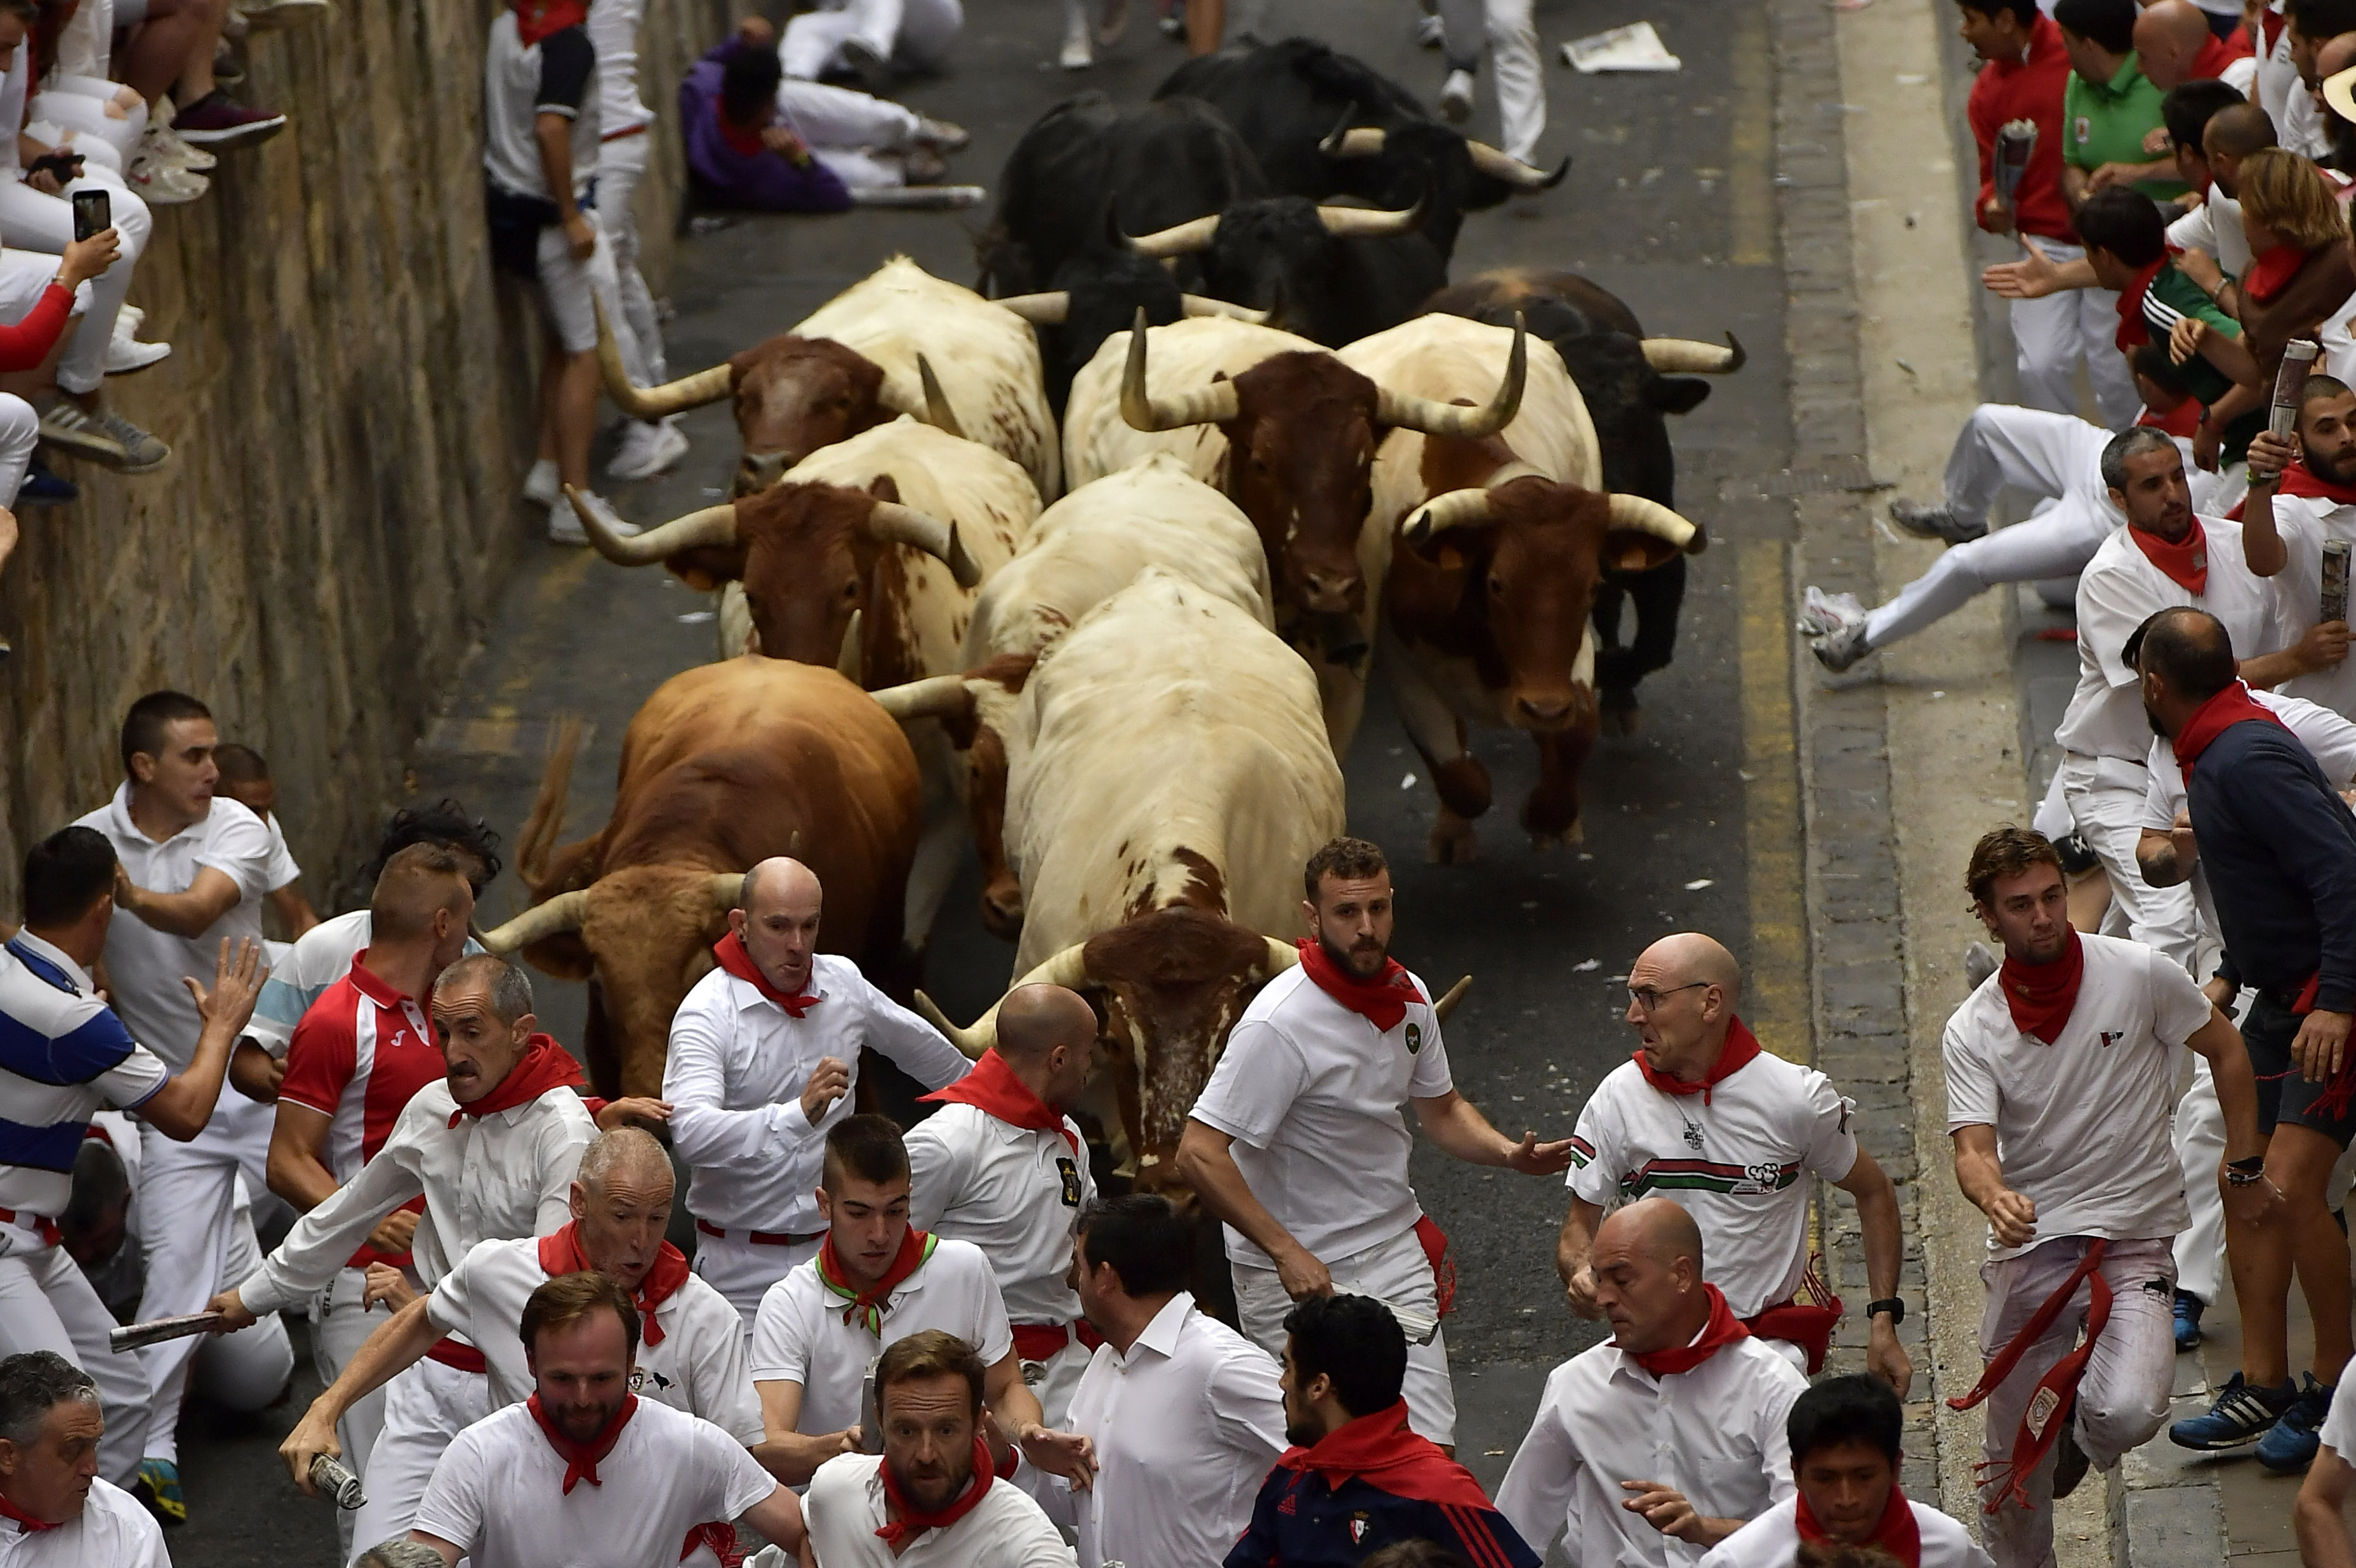 3 runners gored racing with bulls at Pamplona’s festival Inquirer News